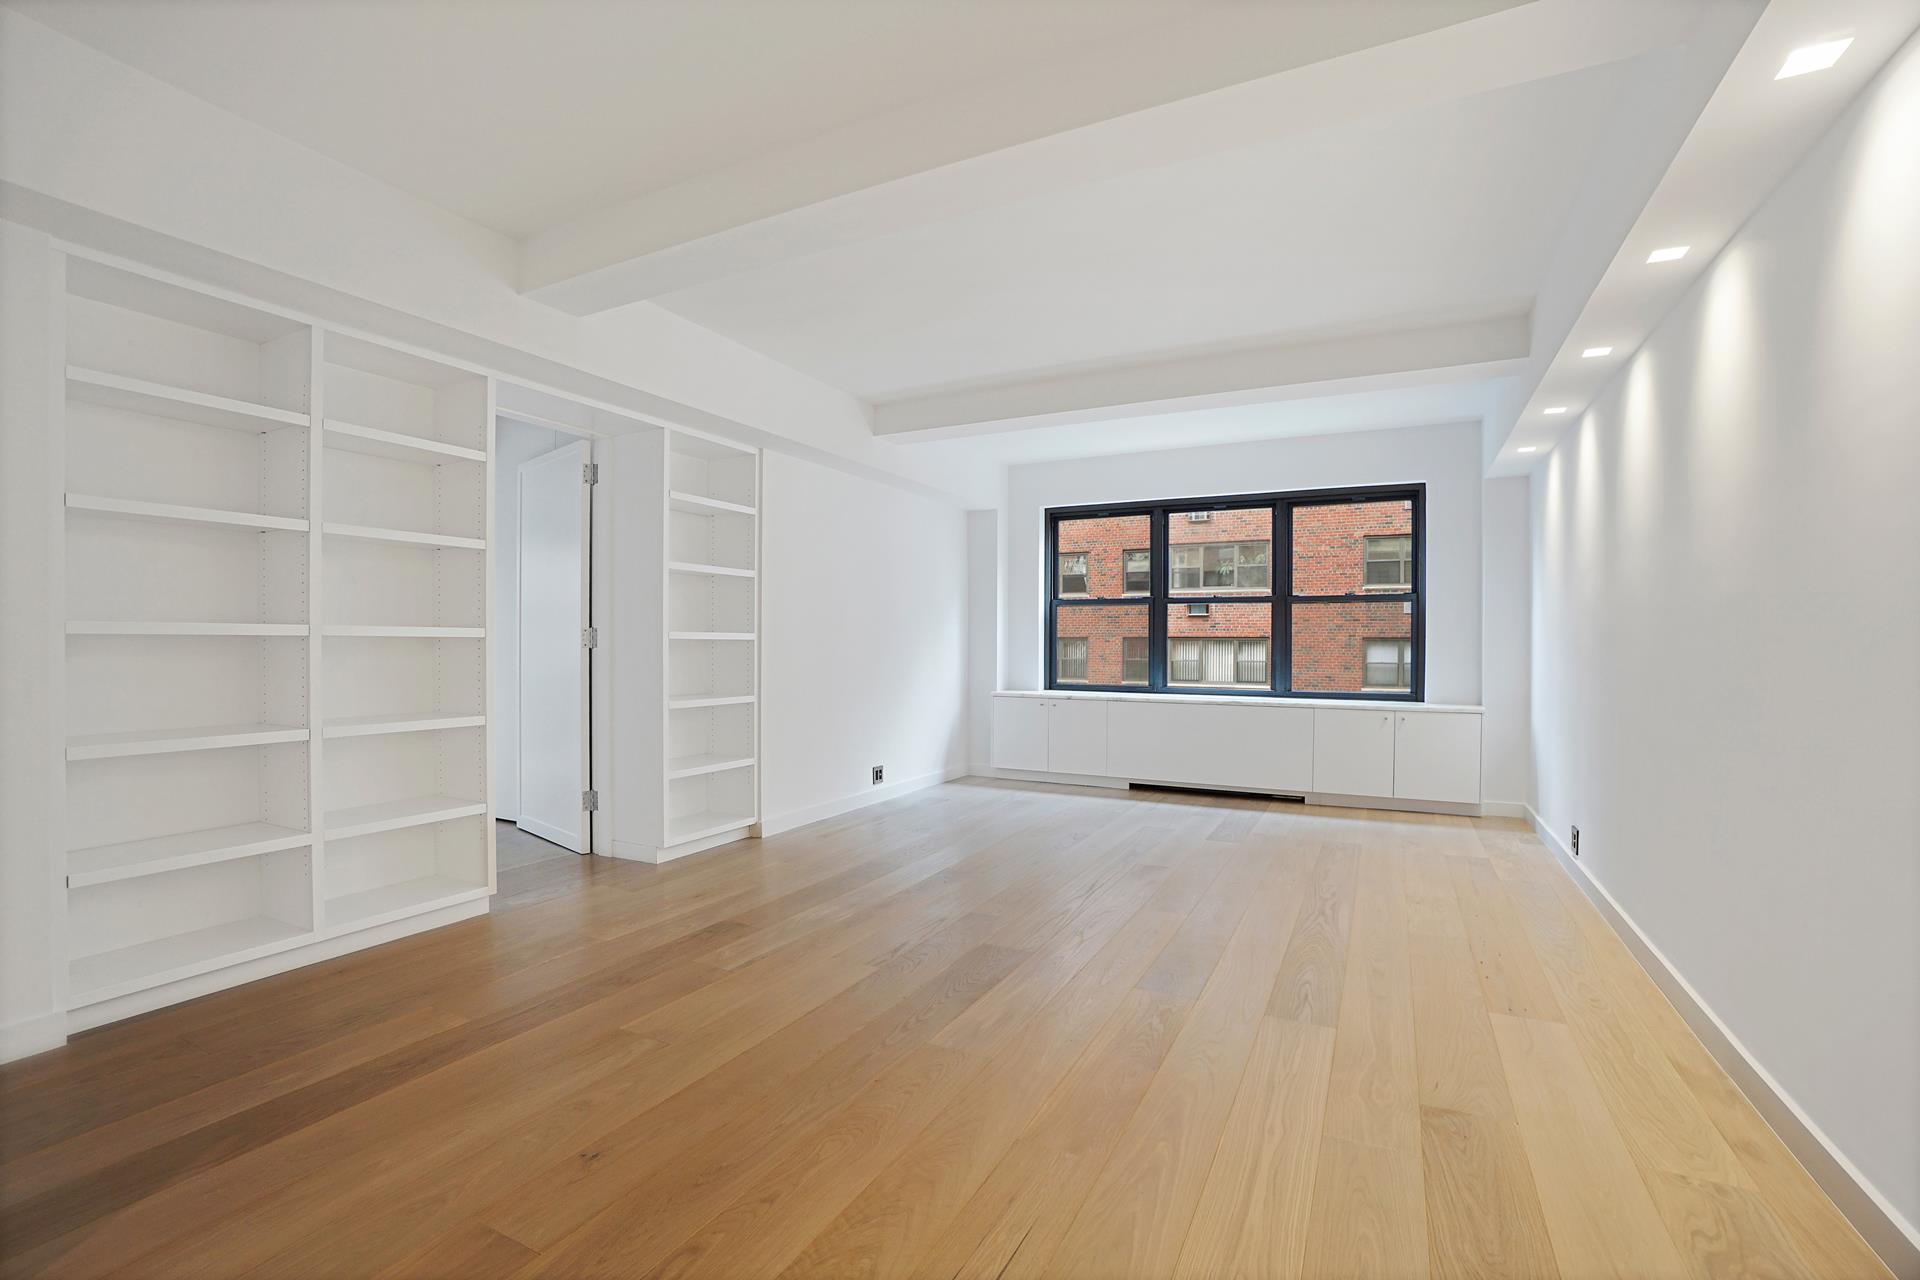 177 East 77th Street 5A, Lenox Hill, Upper East Side, NYC - 3 Bedrooms  
2 Bathrooms  
7 Rooms - 